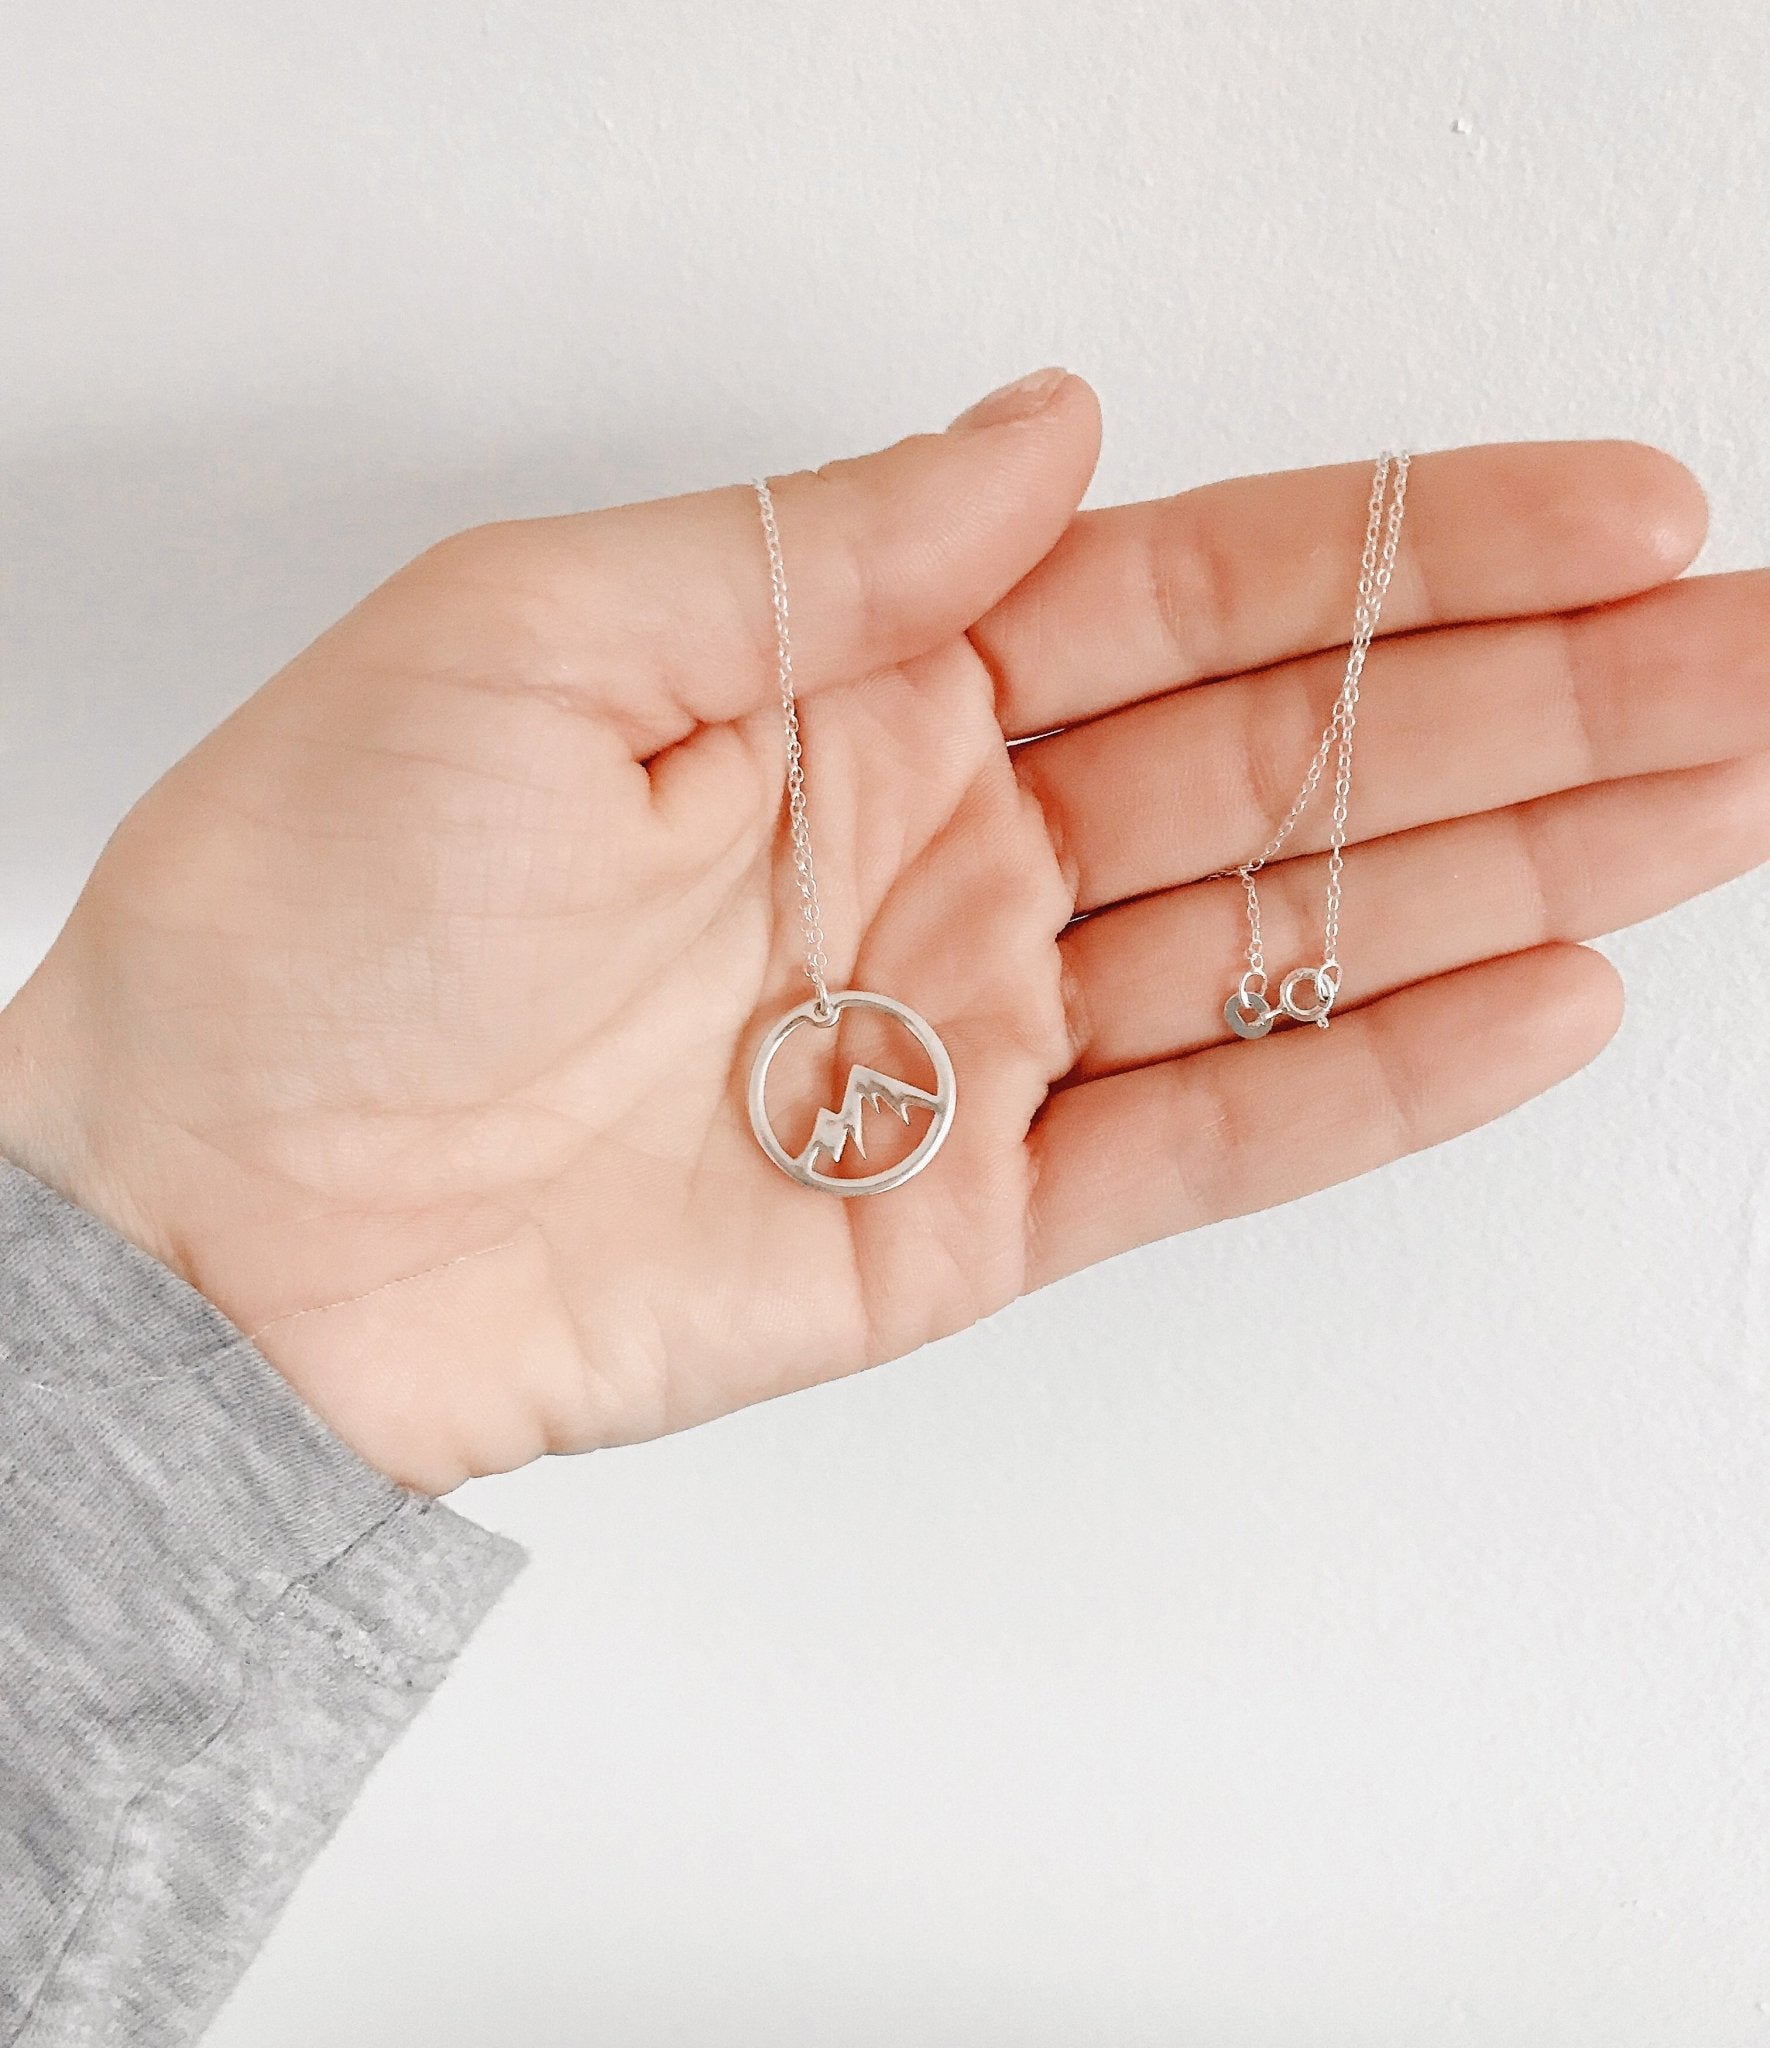 Circle Mountain Sterling Silver Adventure Necklace - Women - Accessories - Jewelry - Necklaces - Pendants - Benn~Burry